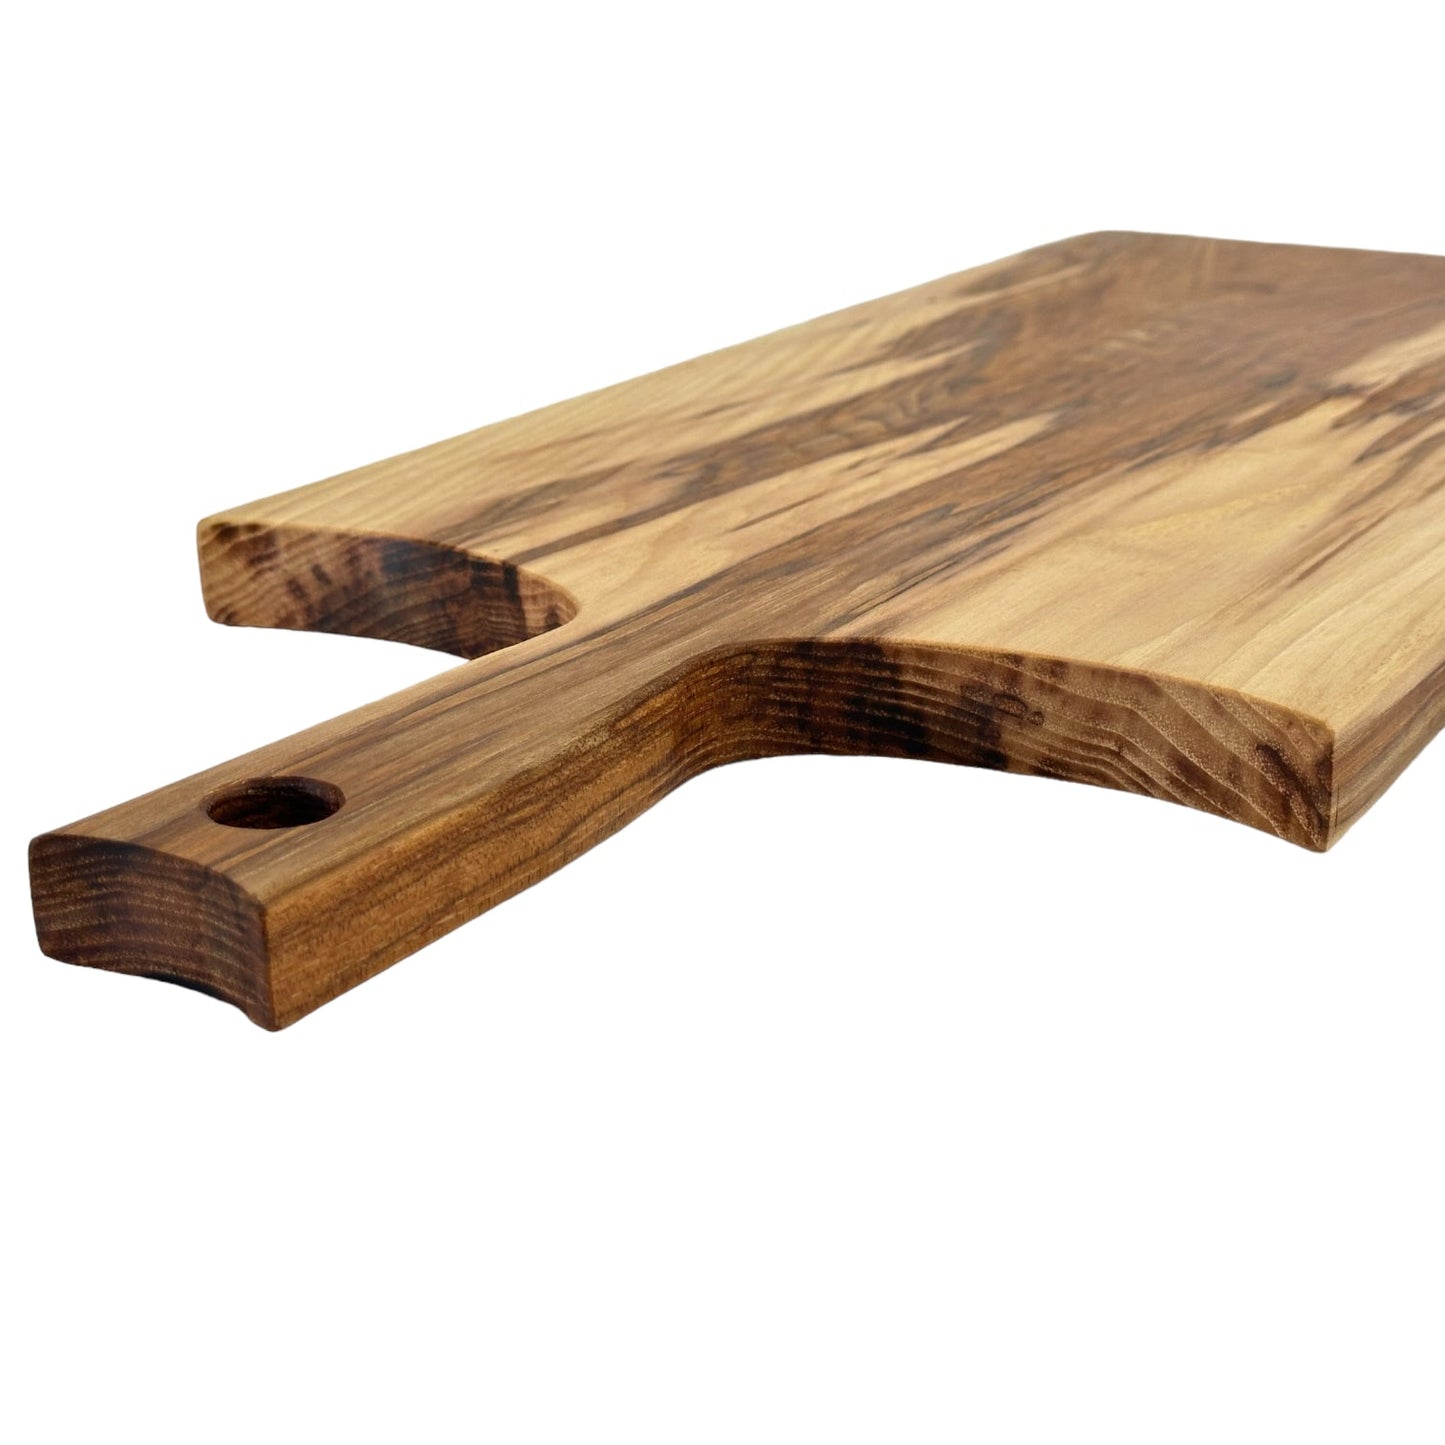 Rustic Handmade Wooden Charcuterie Boards - RTS hickory handle deteil view 2